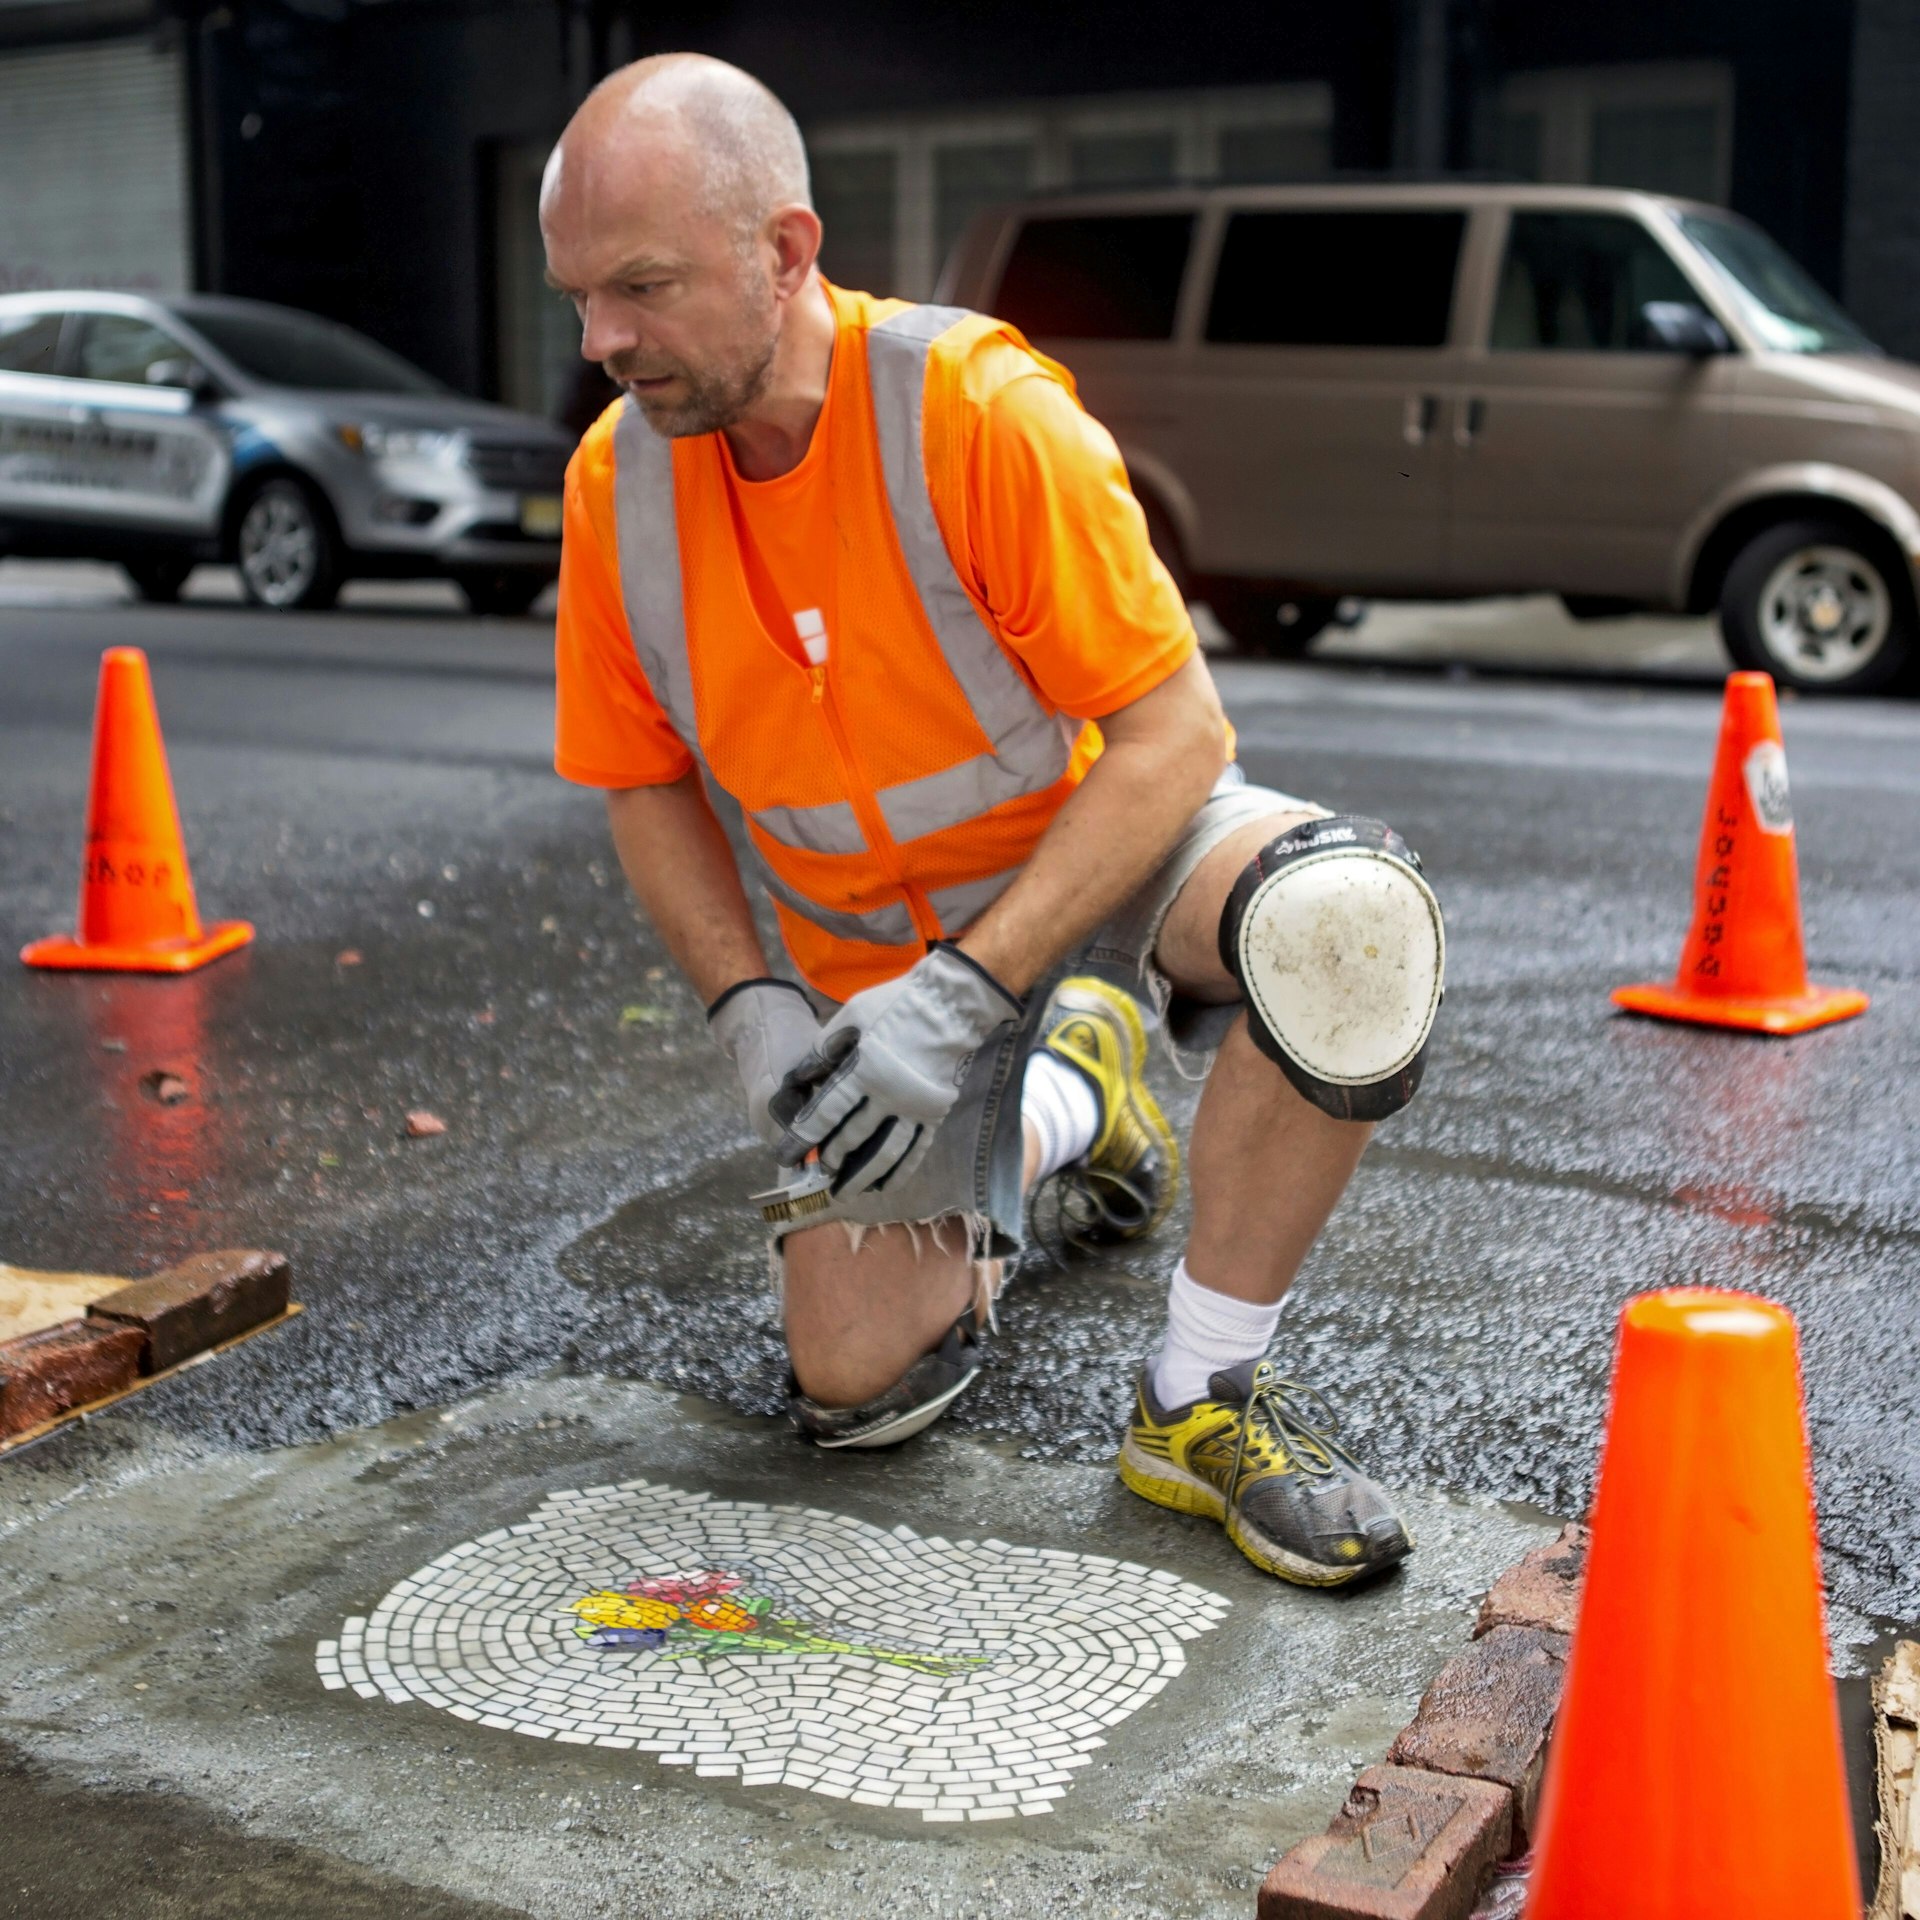 Jim Bachor wears an safety orange t-shirt and reflective vest as he crouches between three orange traffic cones in gloves and kneepads over a white mosaic with a cluster of colorful flowers at its center